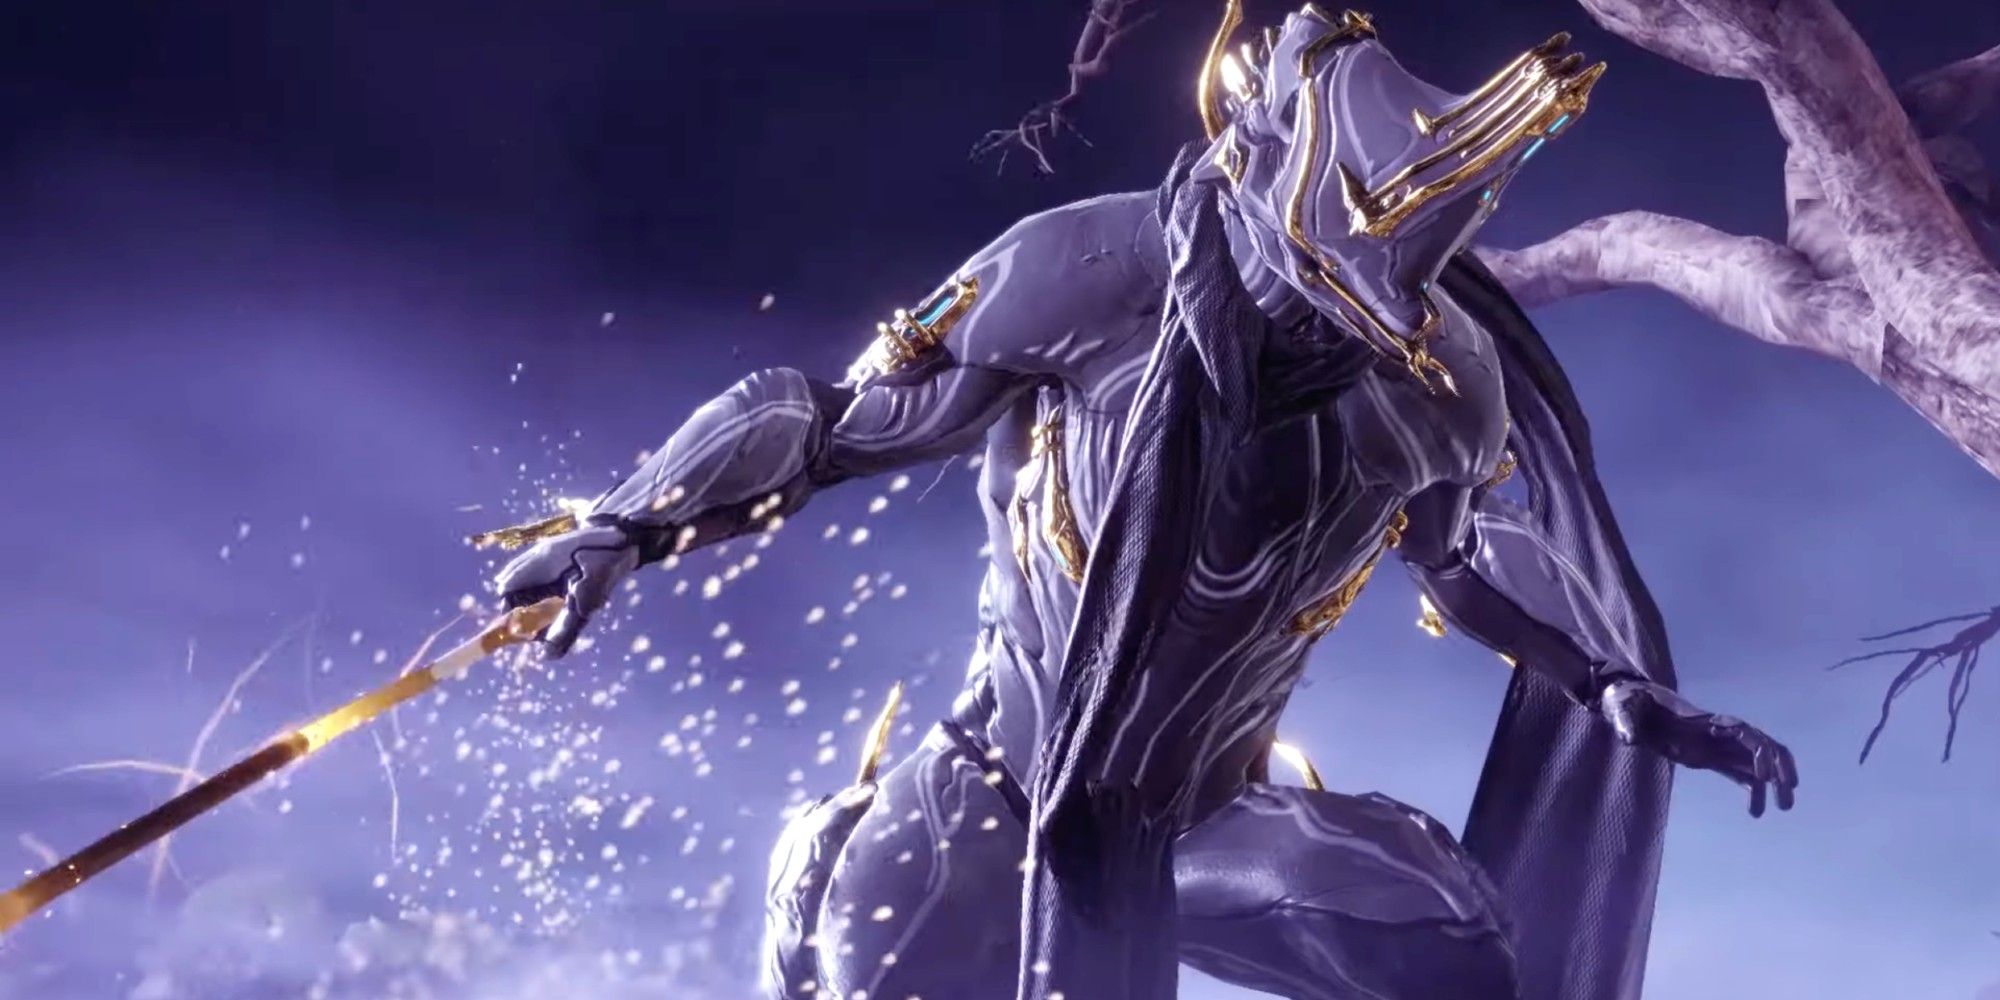 Warframe thicc Tenno attacking with sword